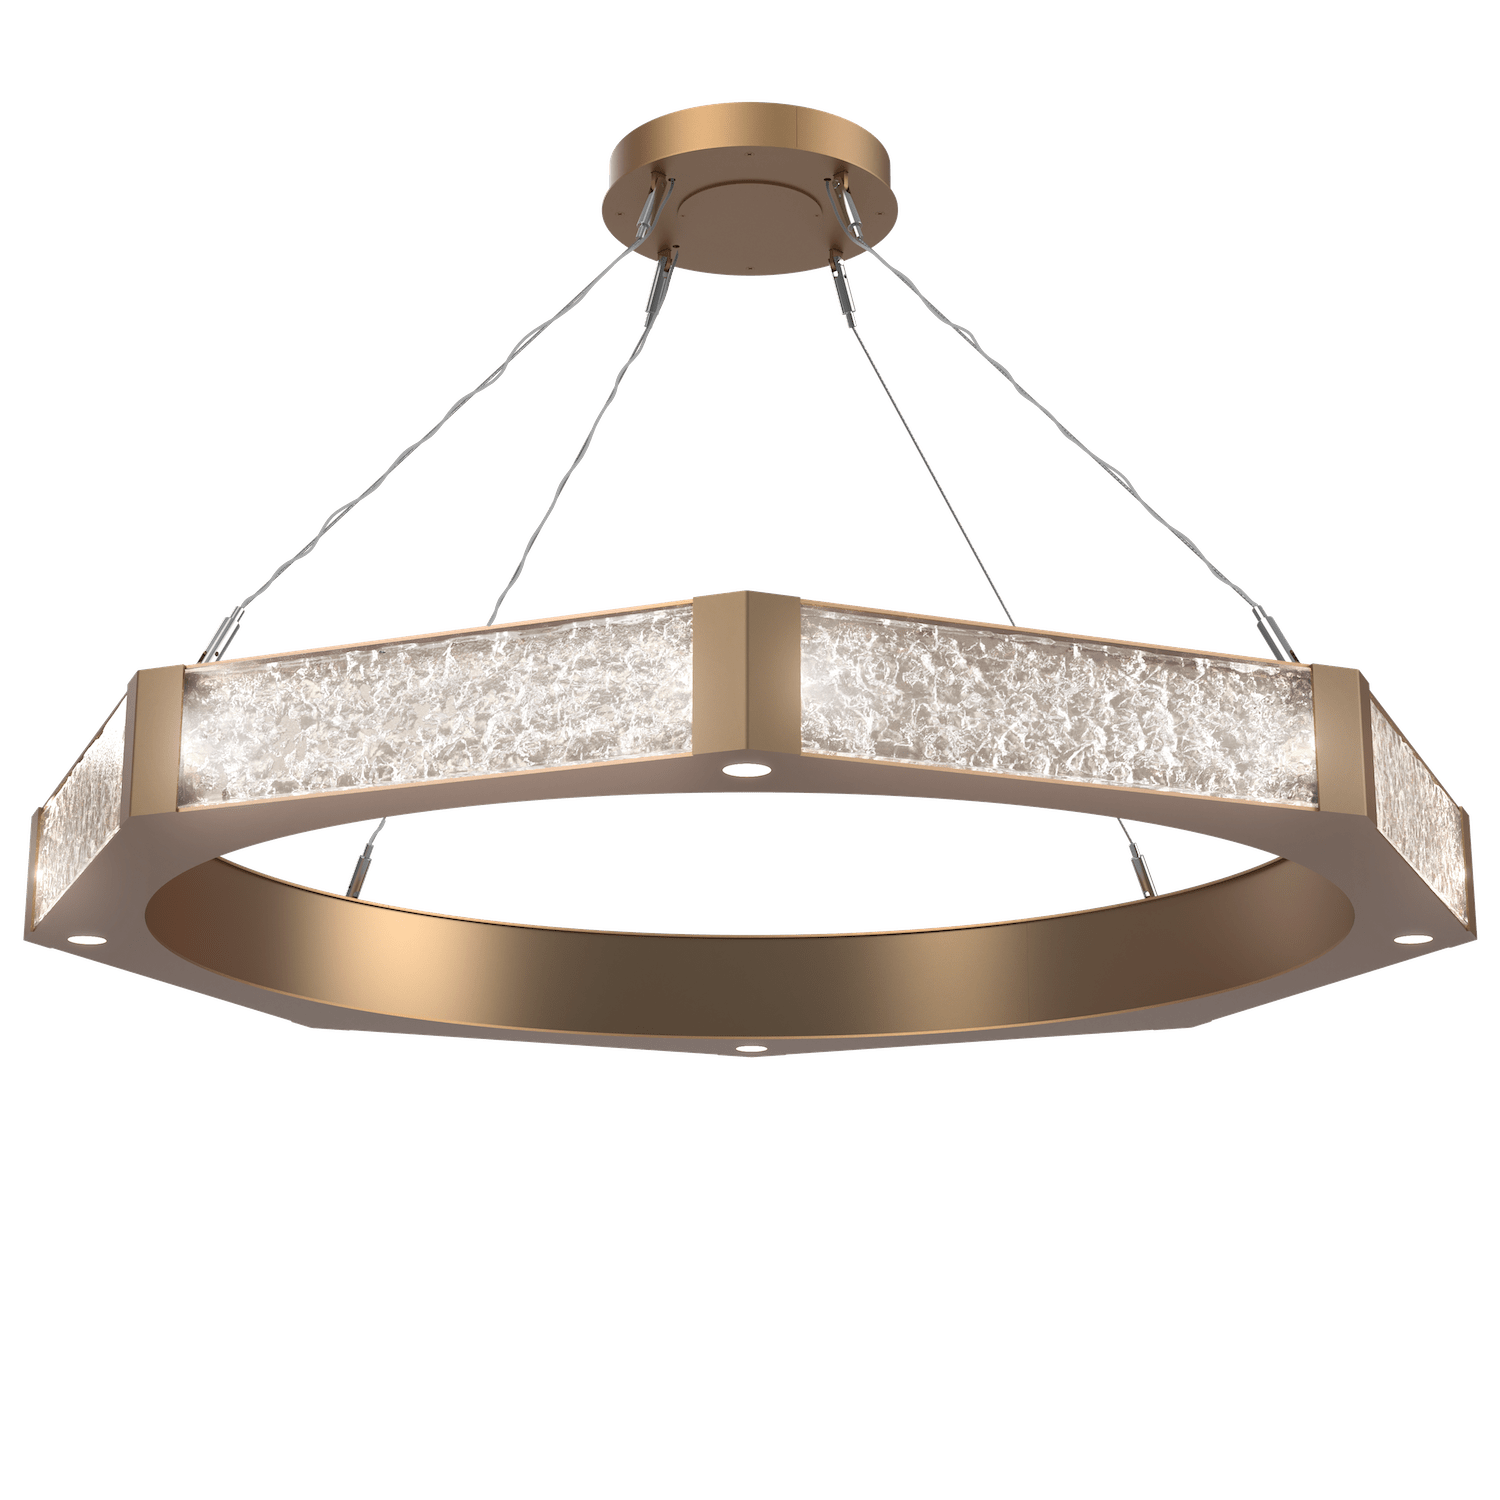 CHB0061-48-NB-GC-Hammerton-Studio-Glacier-48-inch-ring-chandelier-with-novel-brass-finish-and-clear-blown-glass-with-geo-clear-cast-glass-diffusers-and-LED-lamping